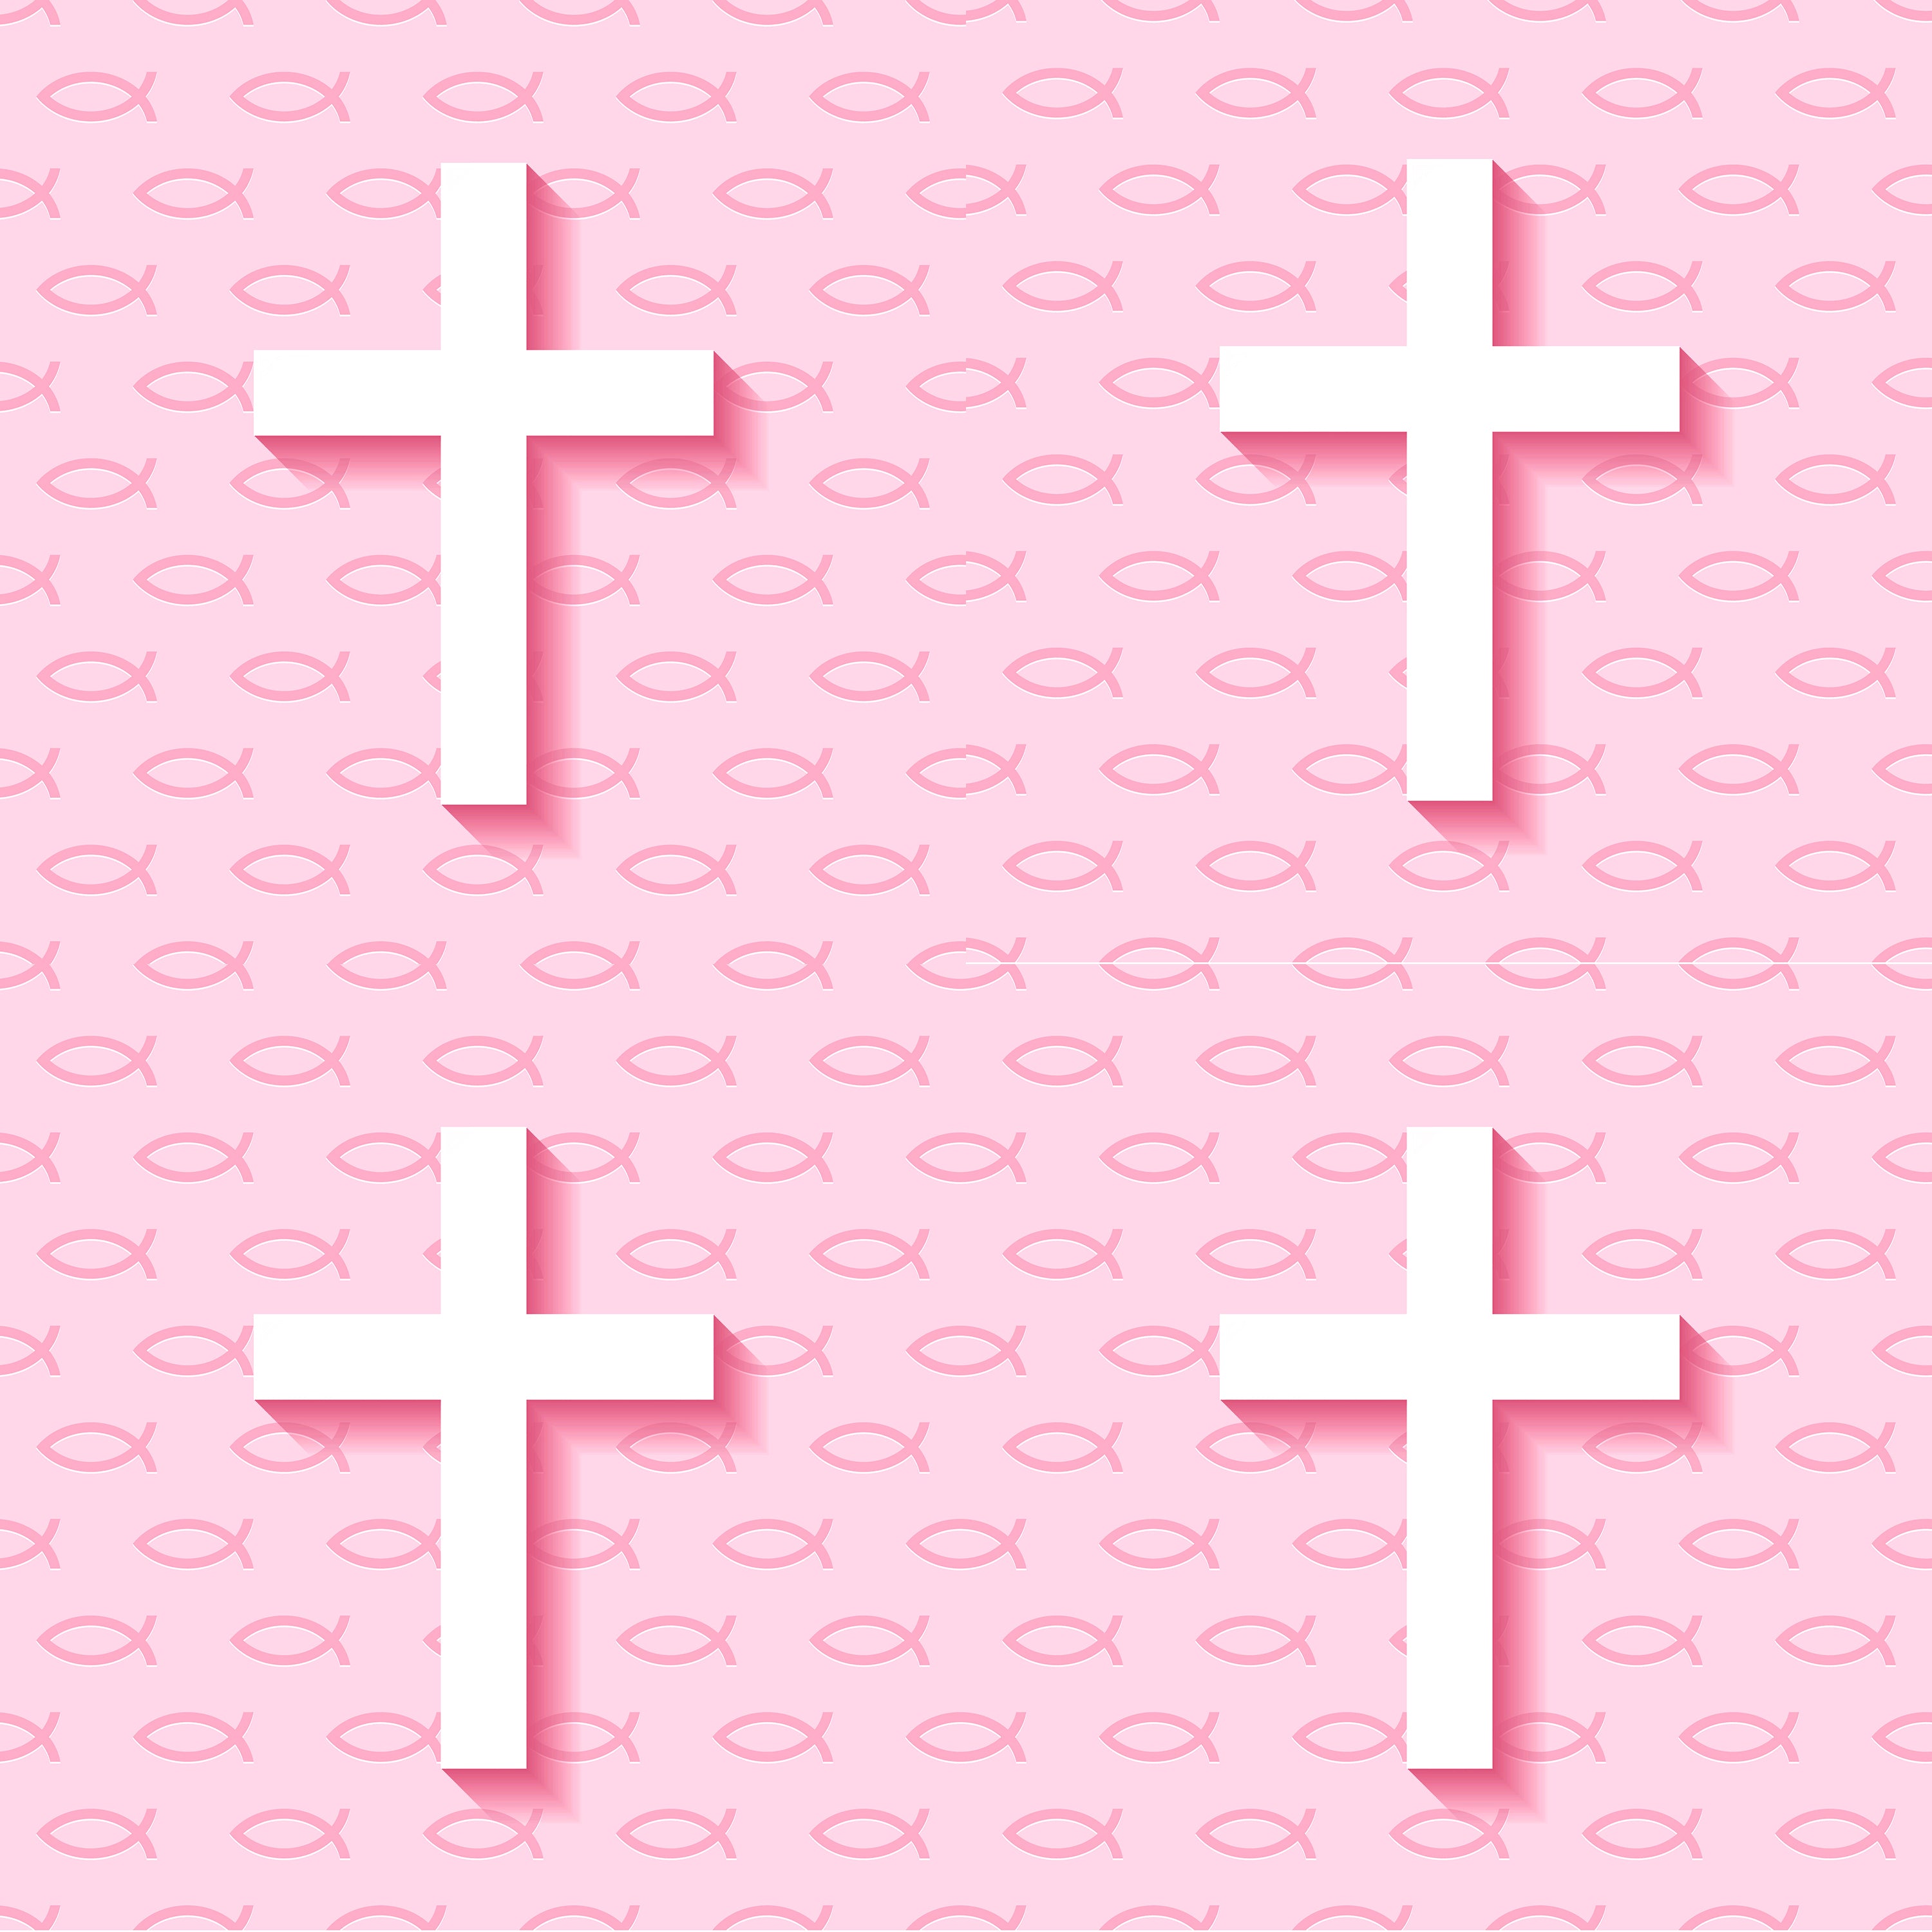 Pink Crosses Fabric, Wallpaper and Home Decor